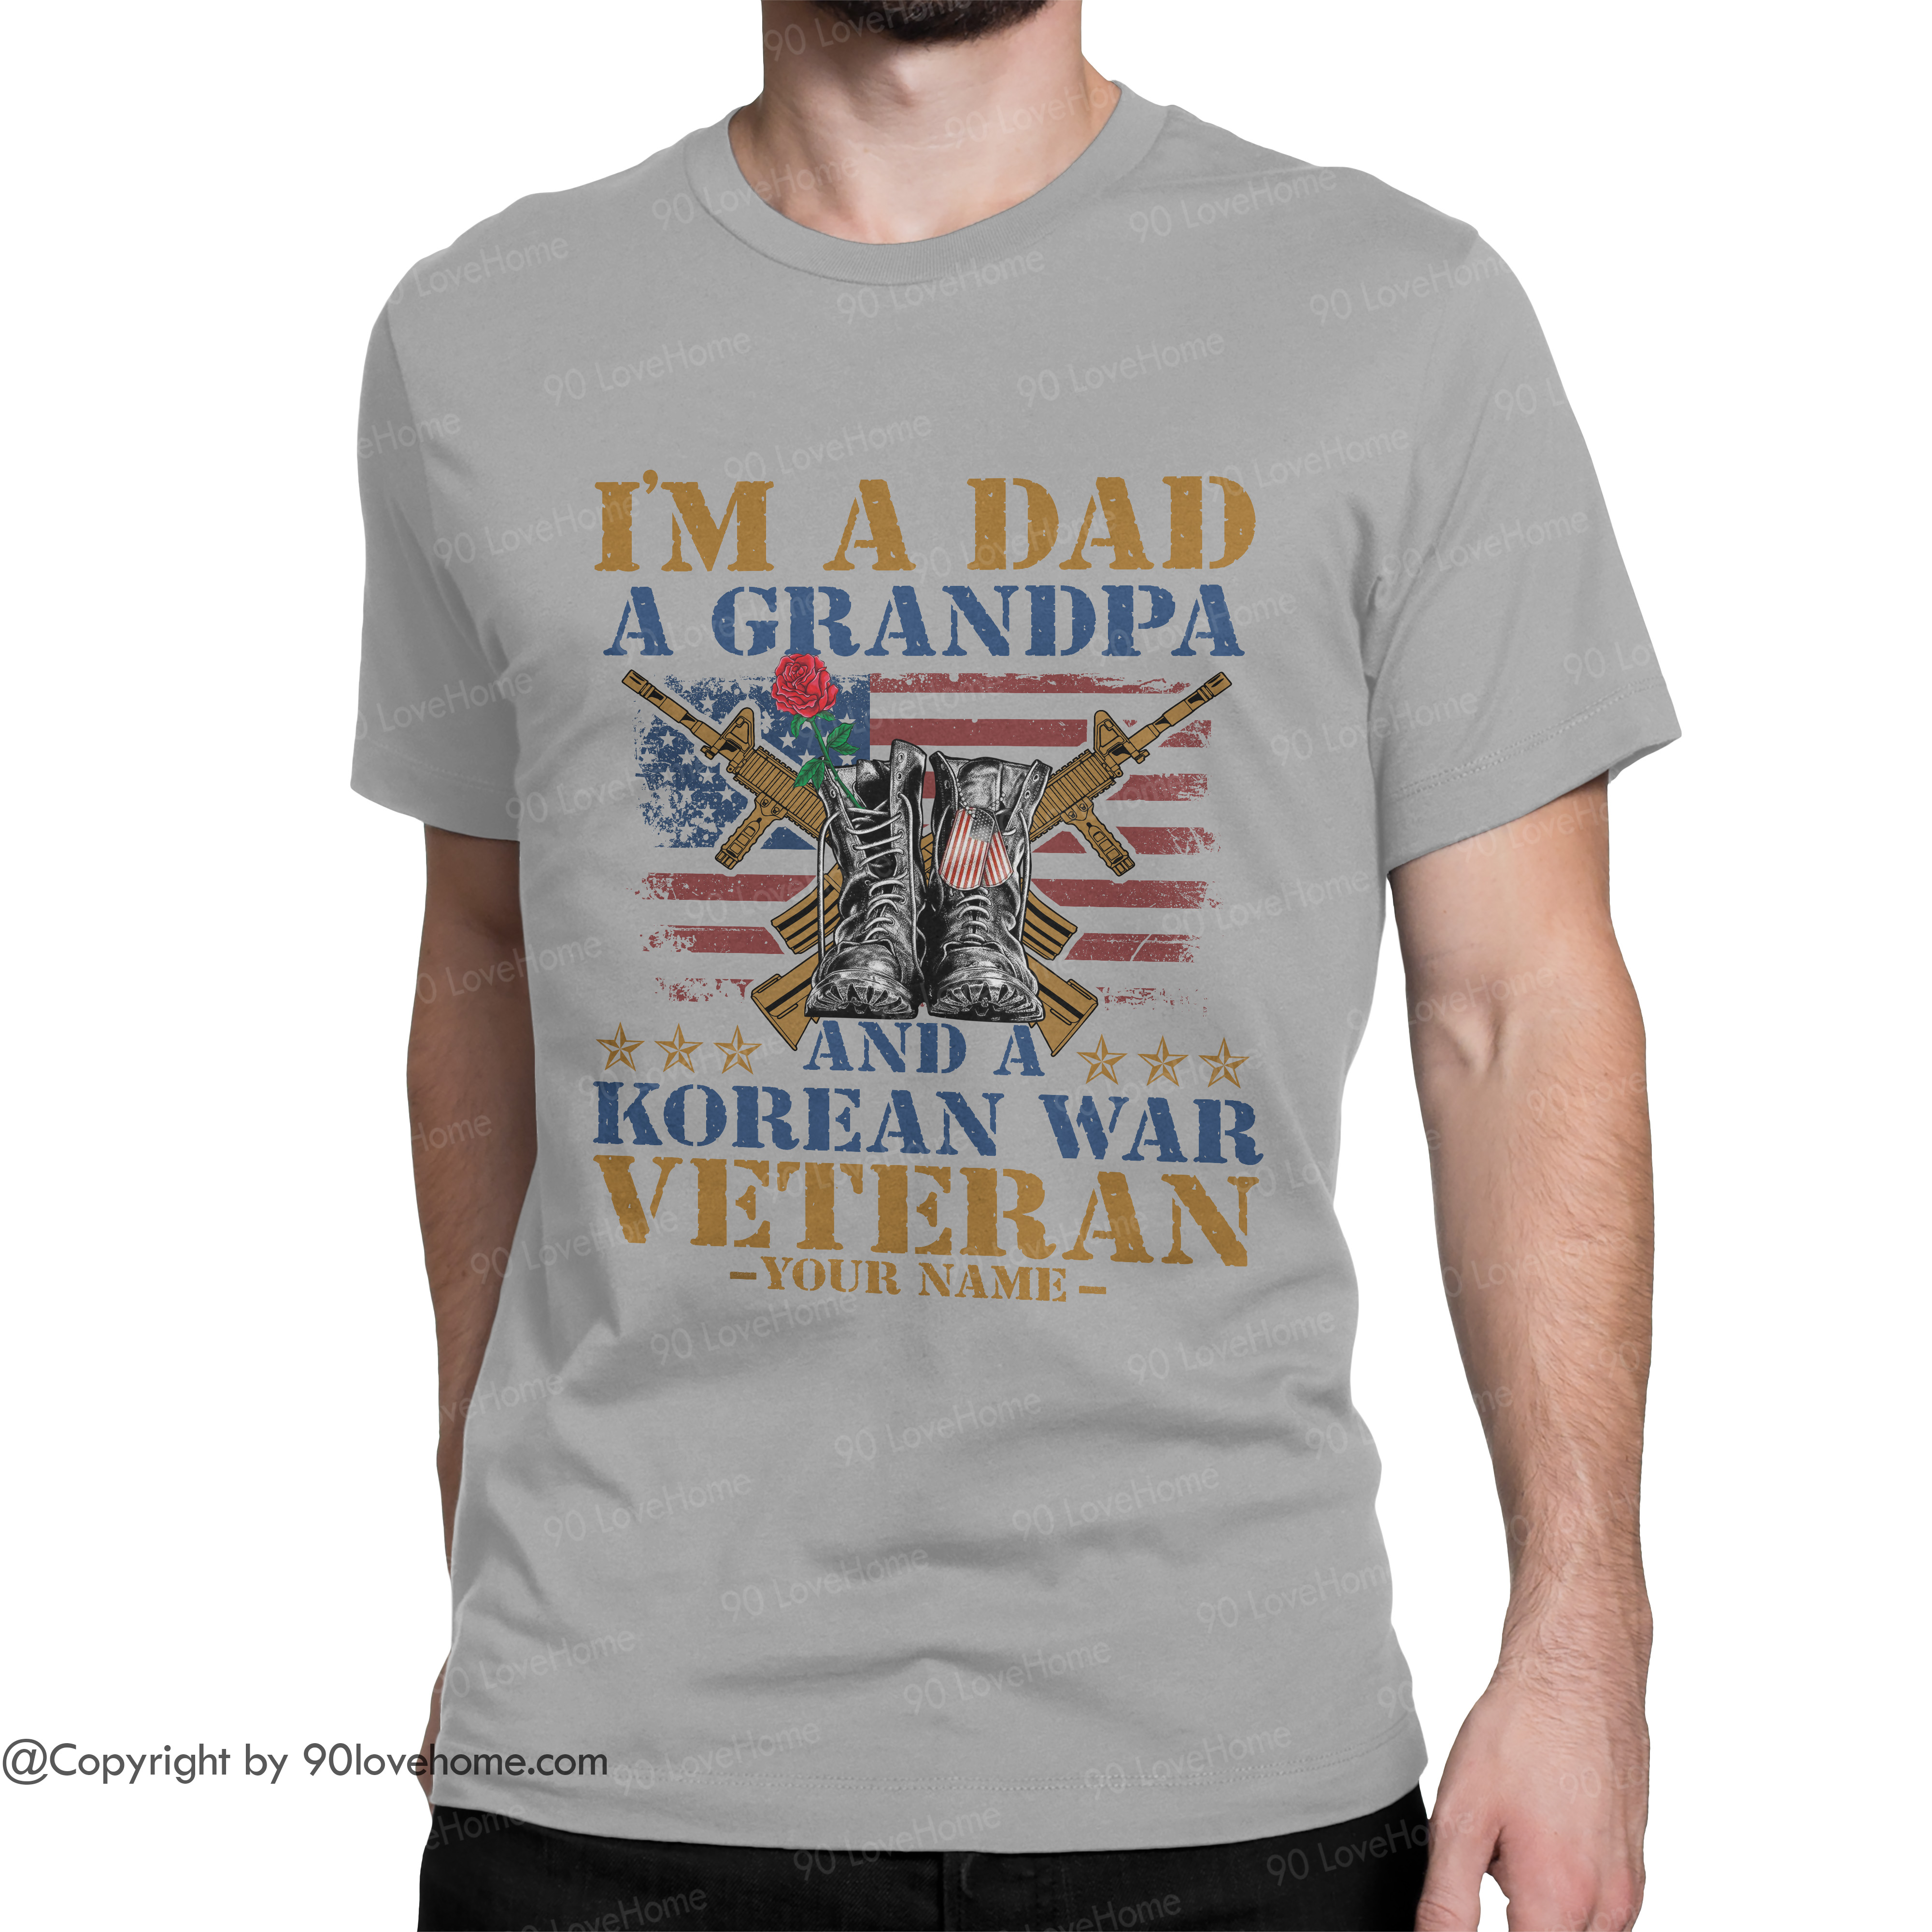 Download Personalized Dad T Shirt Happy Father S Day A Dad A Grandpa And A Korean War Veteran Father Gift Pattern 2 Funny Unisex Tee 90 Lovehome